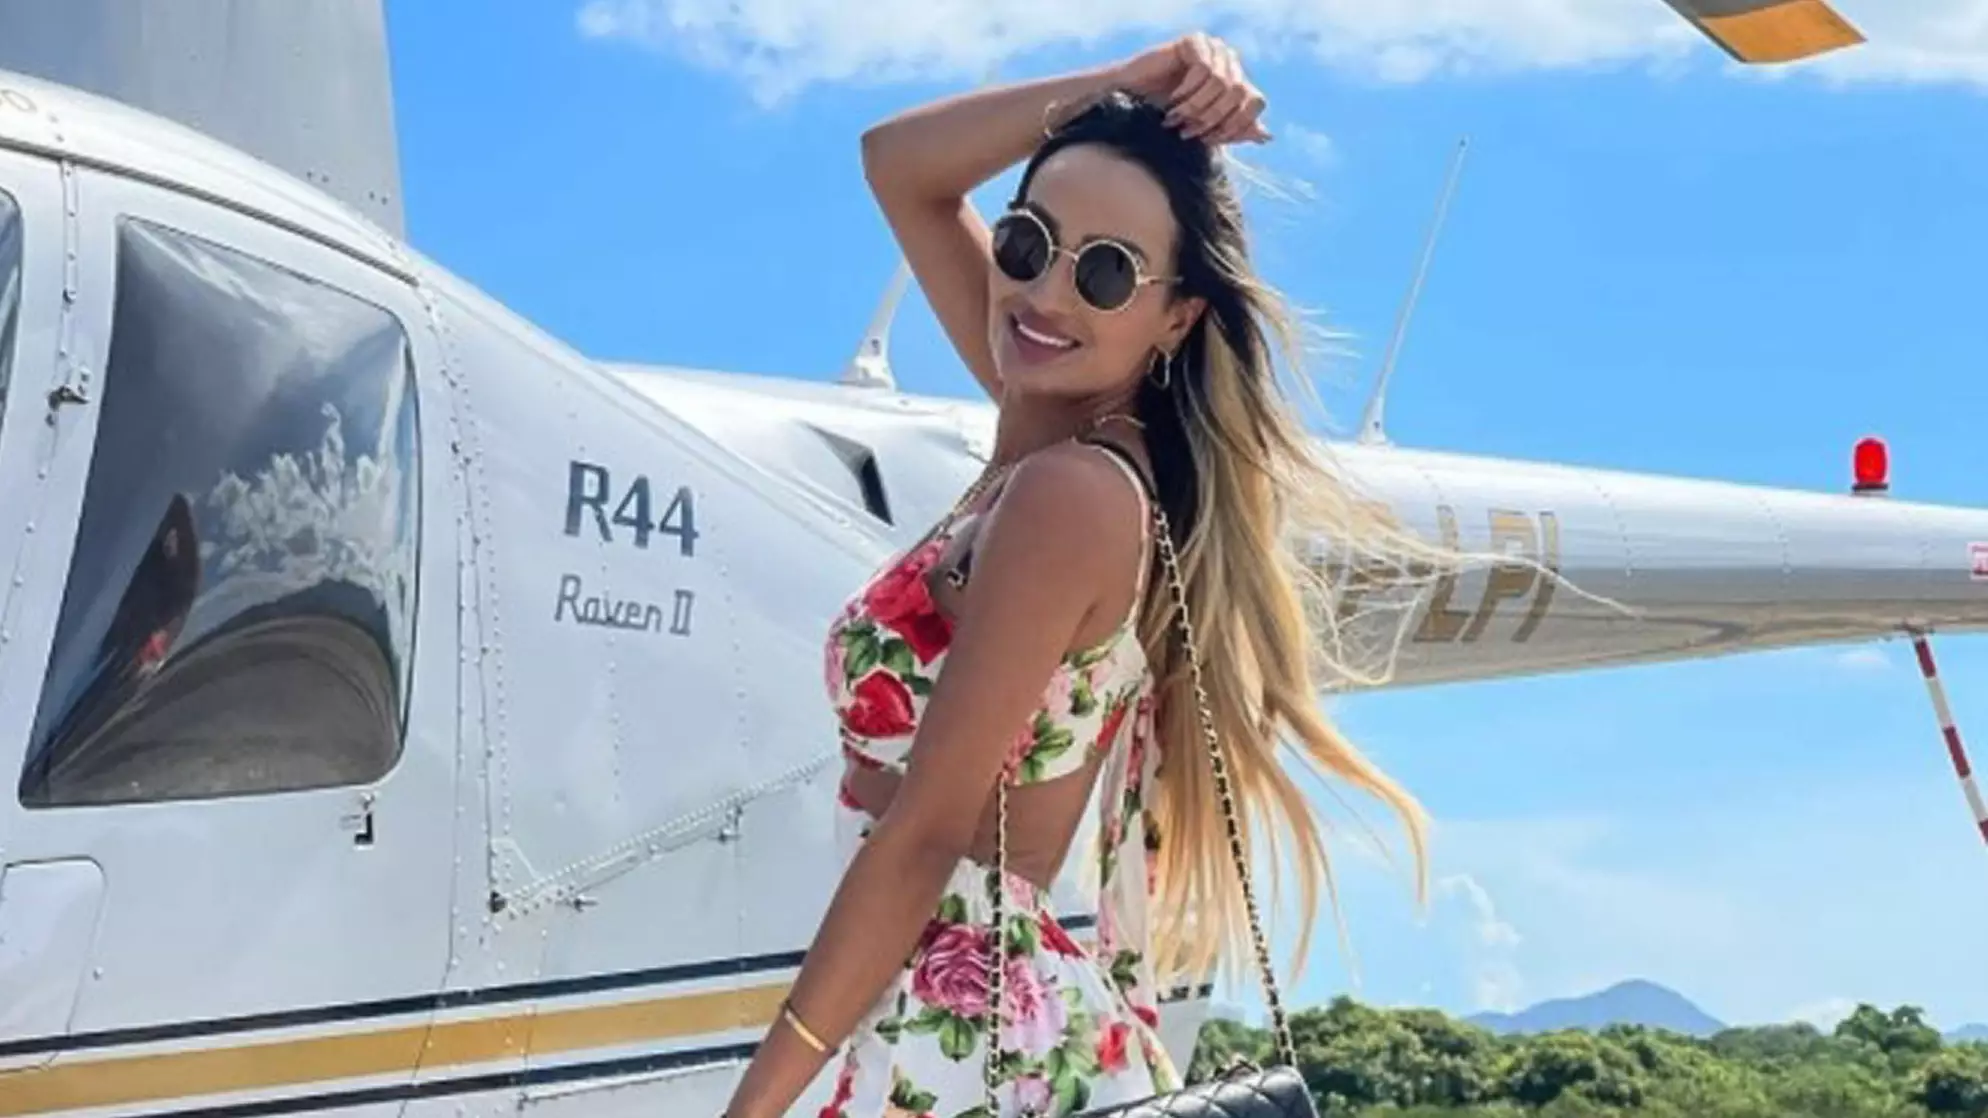 Instagram Influencer Charged After Attempting To Board Plane To Dubai With Cocaine